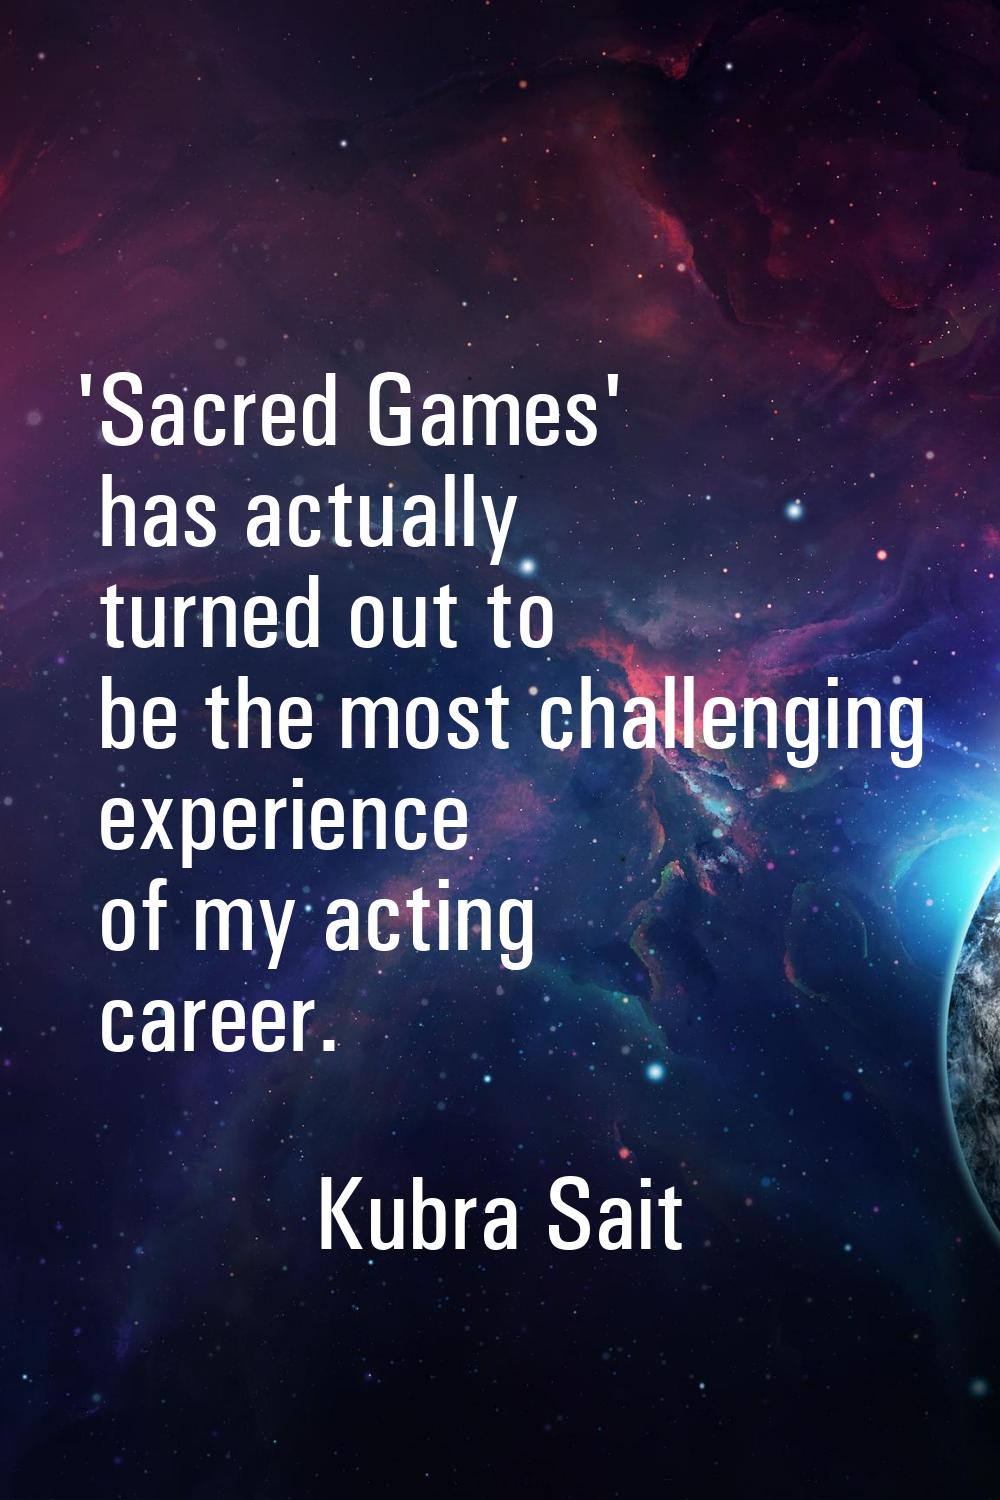 'Sacred Games' has actually turned out to be the most challenging experience of my acting career.